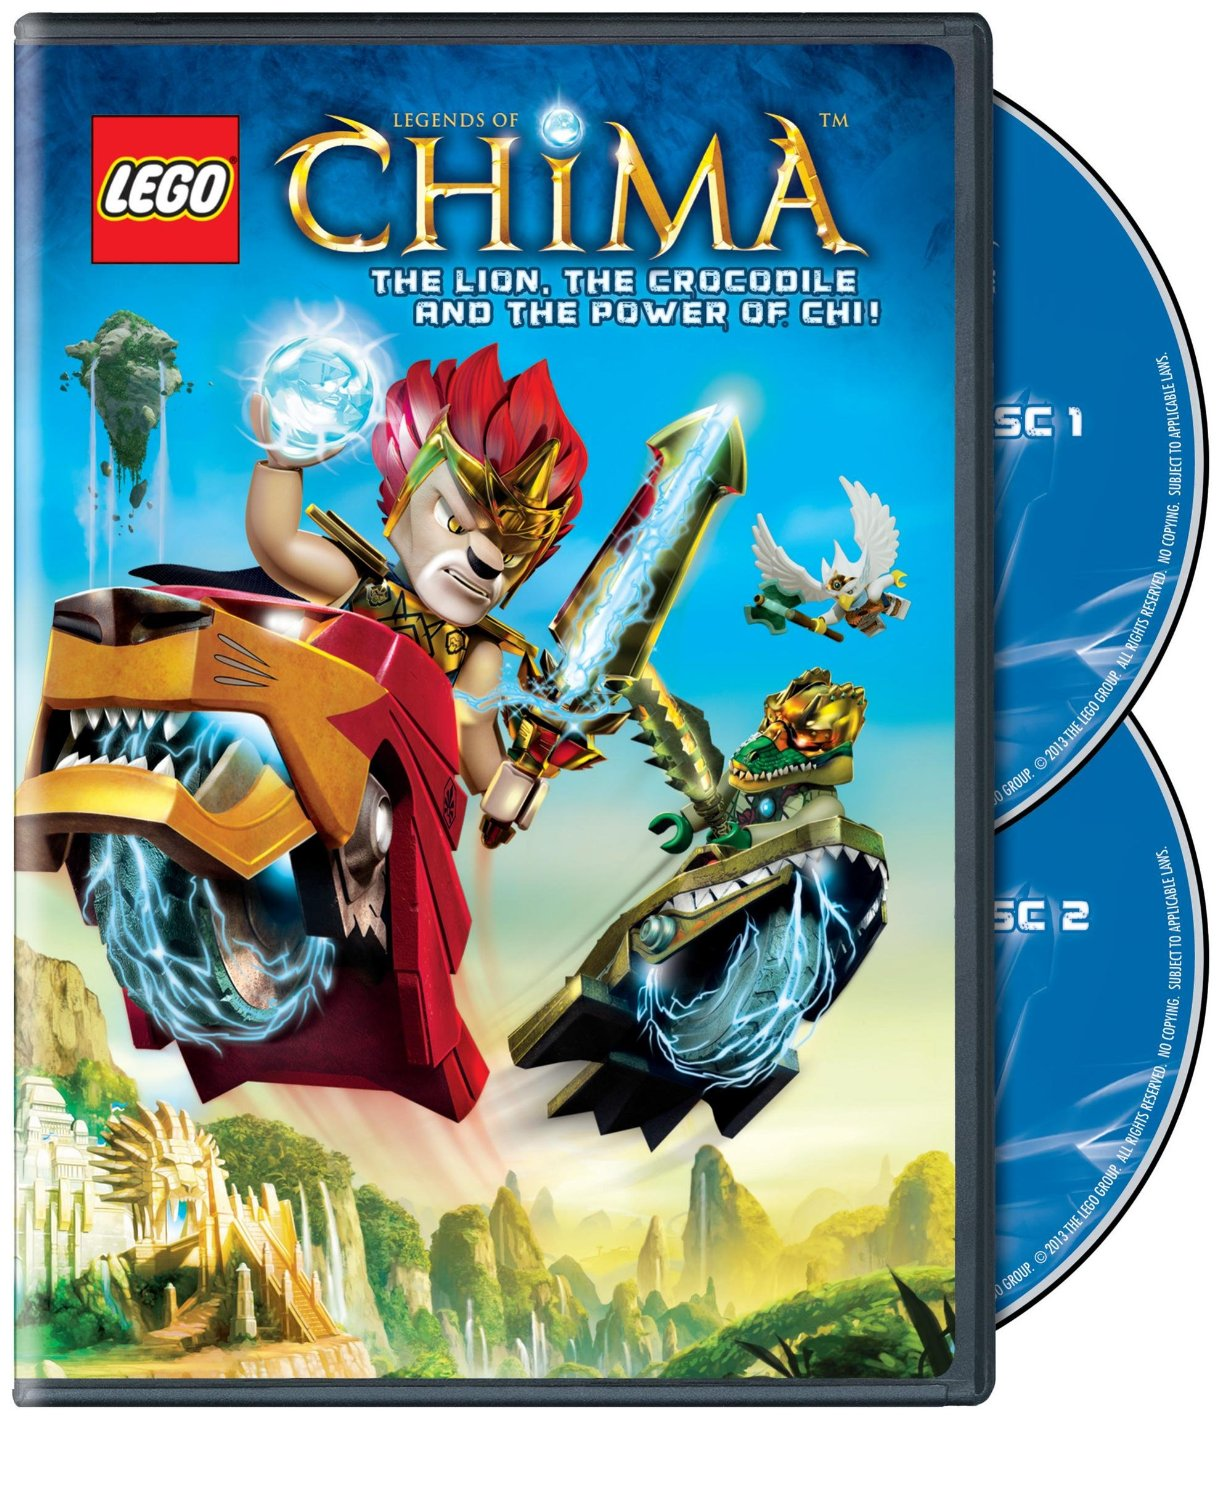 by Savannah: Available on DVD -- LEGO® LEGENDS OF CHIMA: THE LION, THE CROCODILE AND THE POWER OF THE CHI SEASON 1 PART 1 (Review)